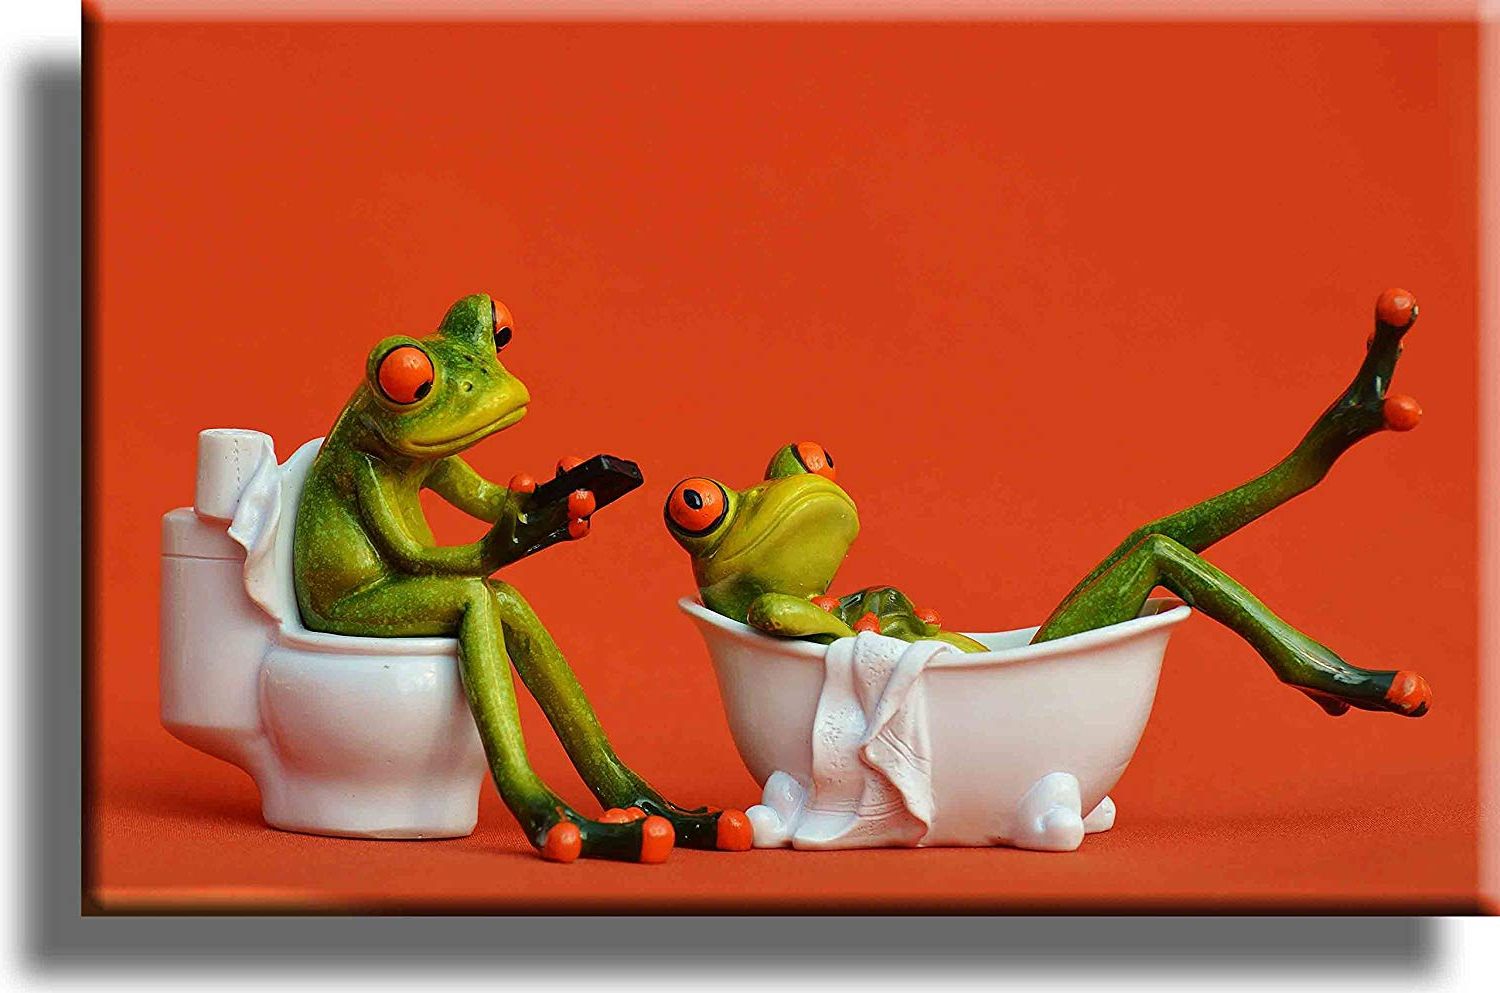 Latest Wall Art Painting On Canvas Frog In Bathroom Wall Decor Funny Frog Painting  For Livingroom Bedroom Decoration Framed Painting Ready To Hang –  Walmart Intended For Frog Wall Art (View 7 of 15)